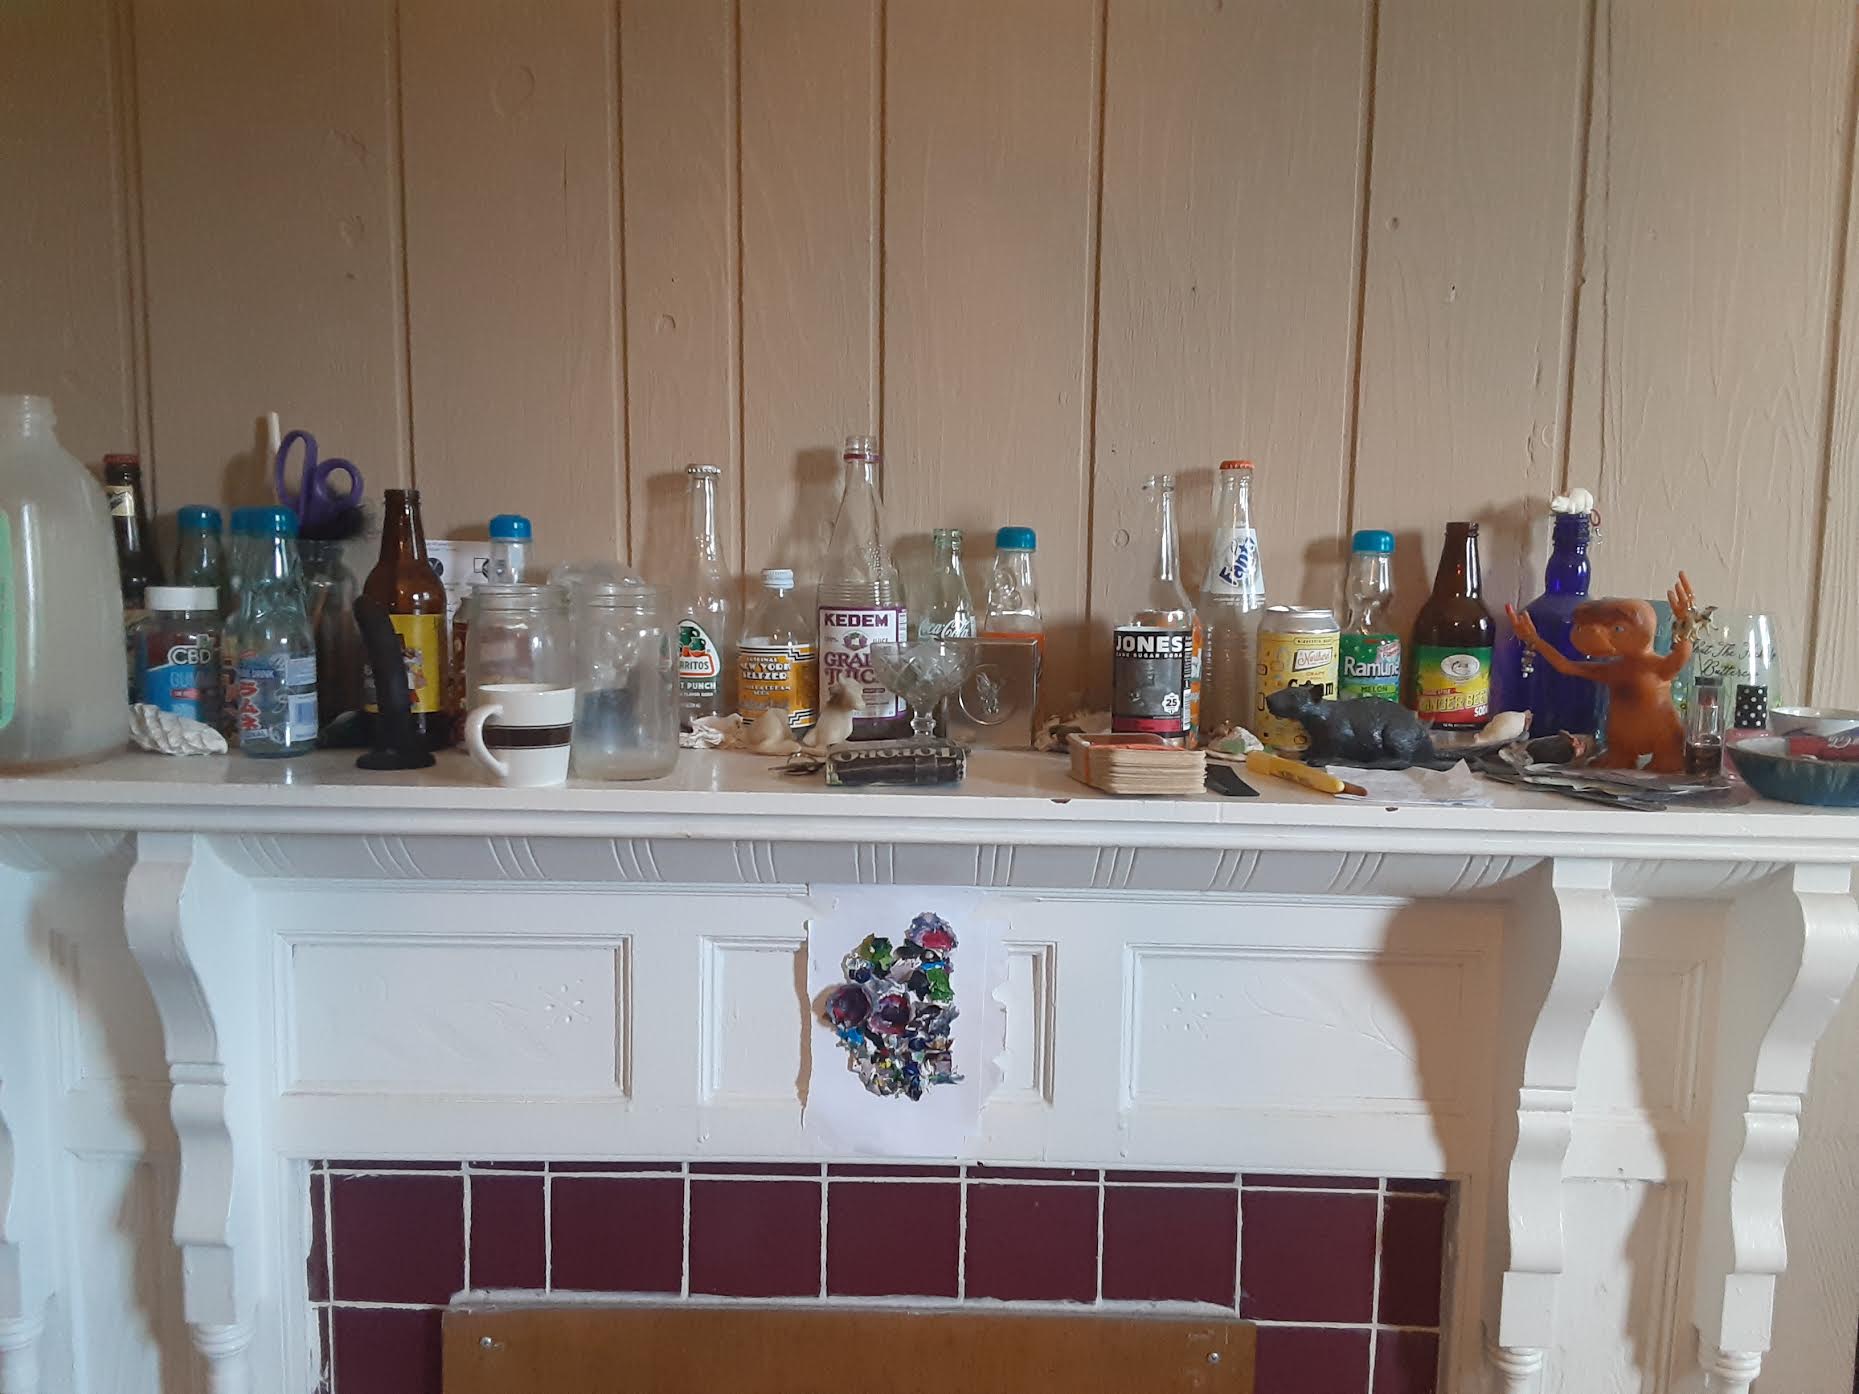 fireplace mantle with objects on it, including many bottles, a dildo, and shells. can click this image to enter a page that says "come in!